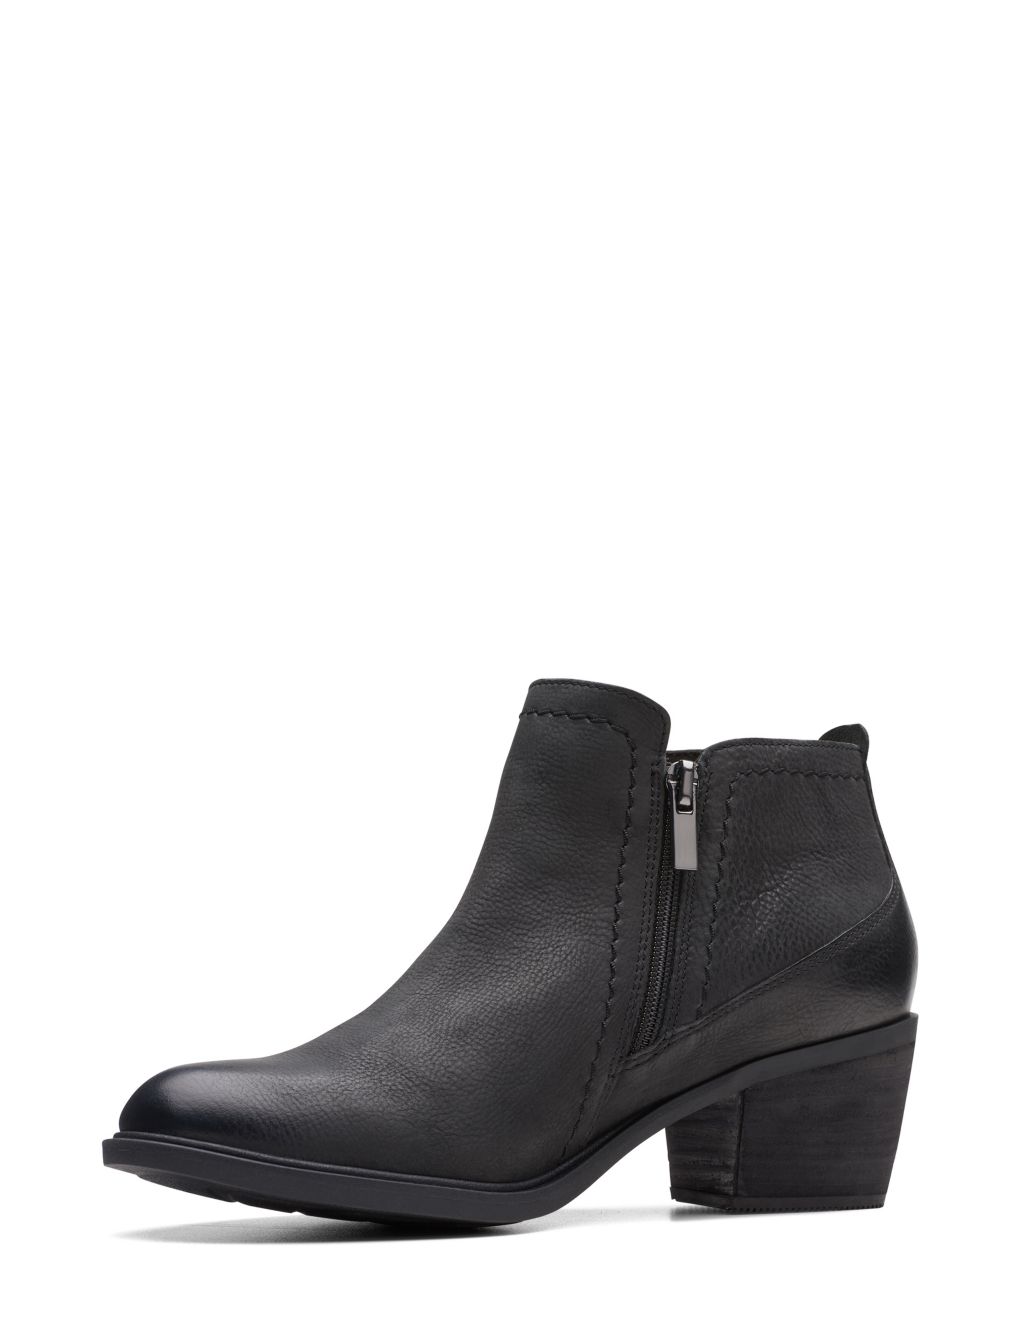 Leather Cowboy Block Heel Ankle Boots image 4